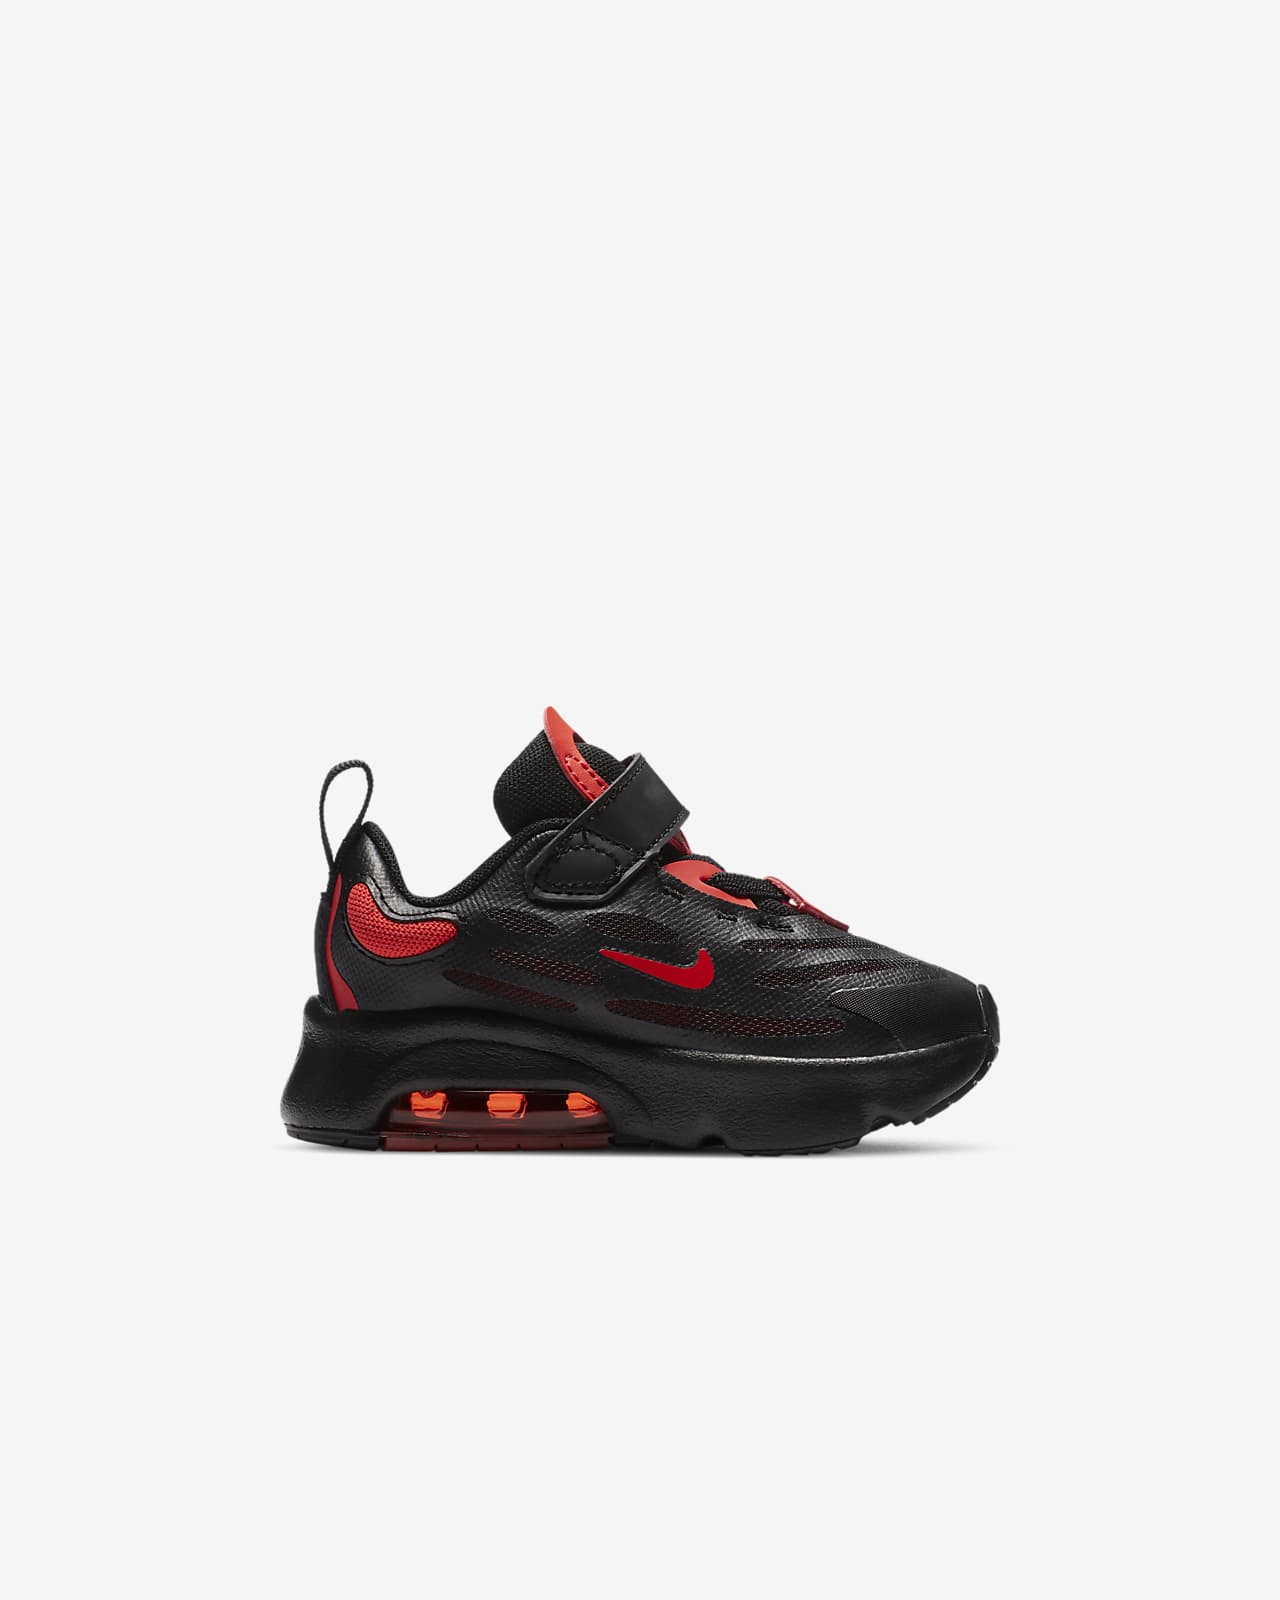 red and black toddler nike shoes